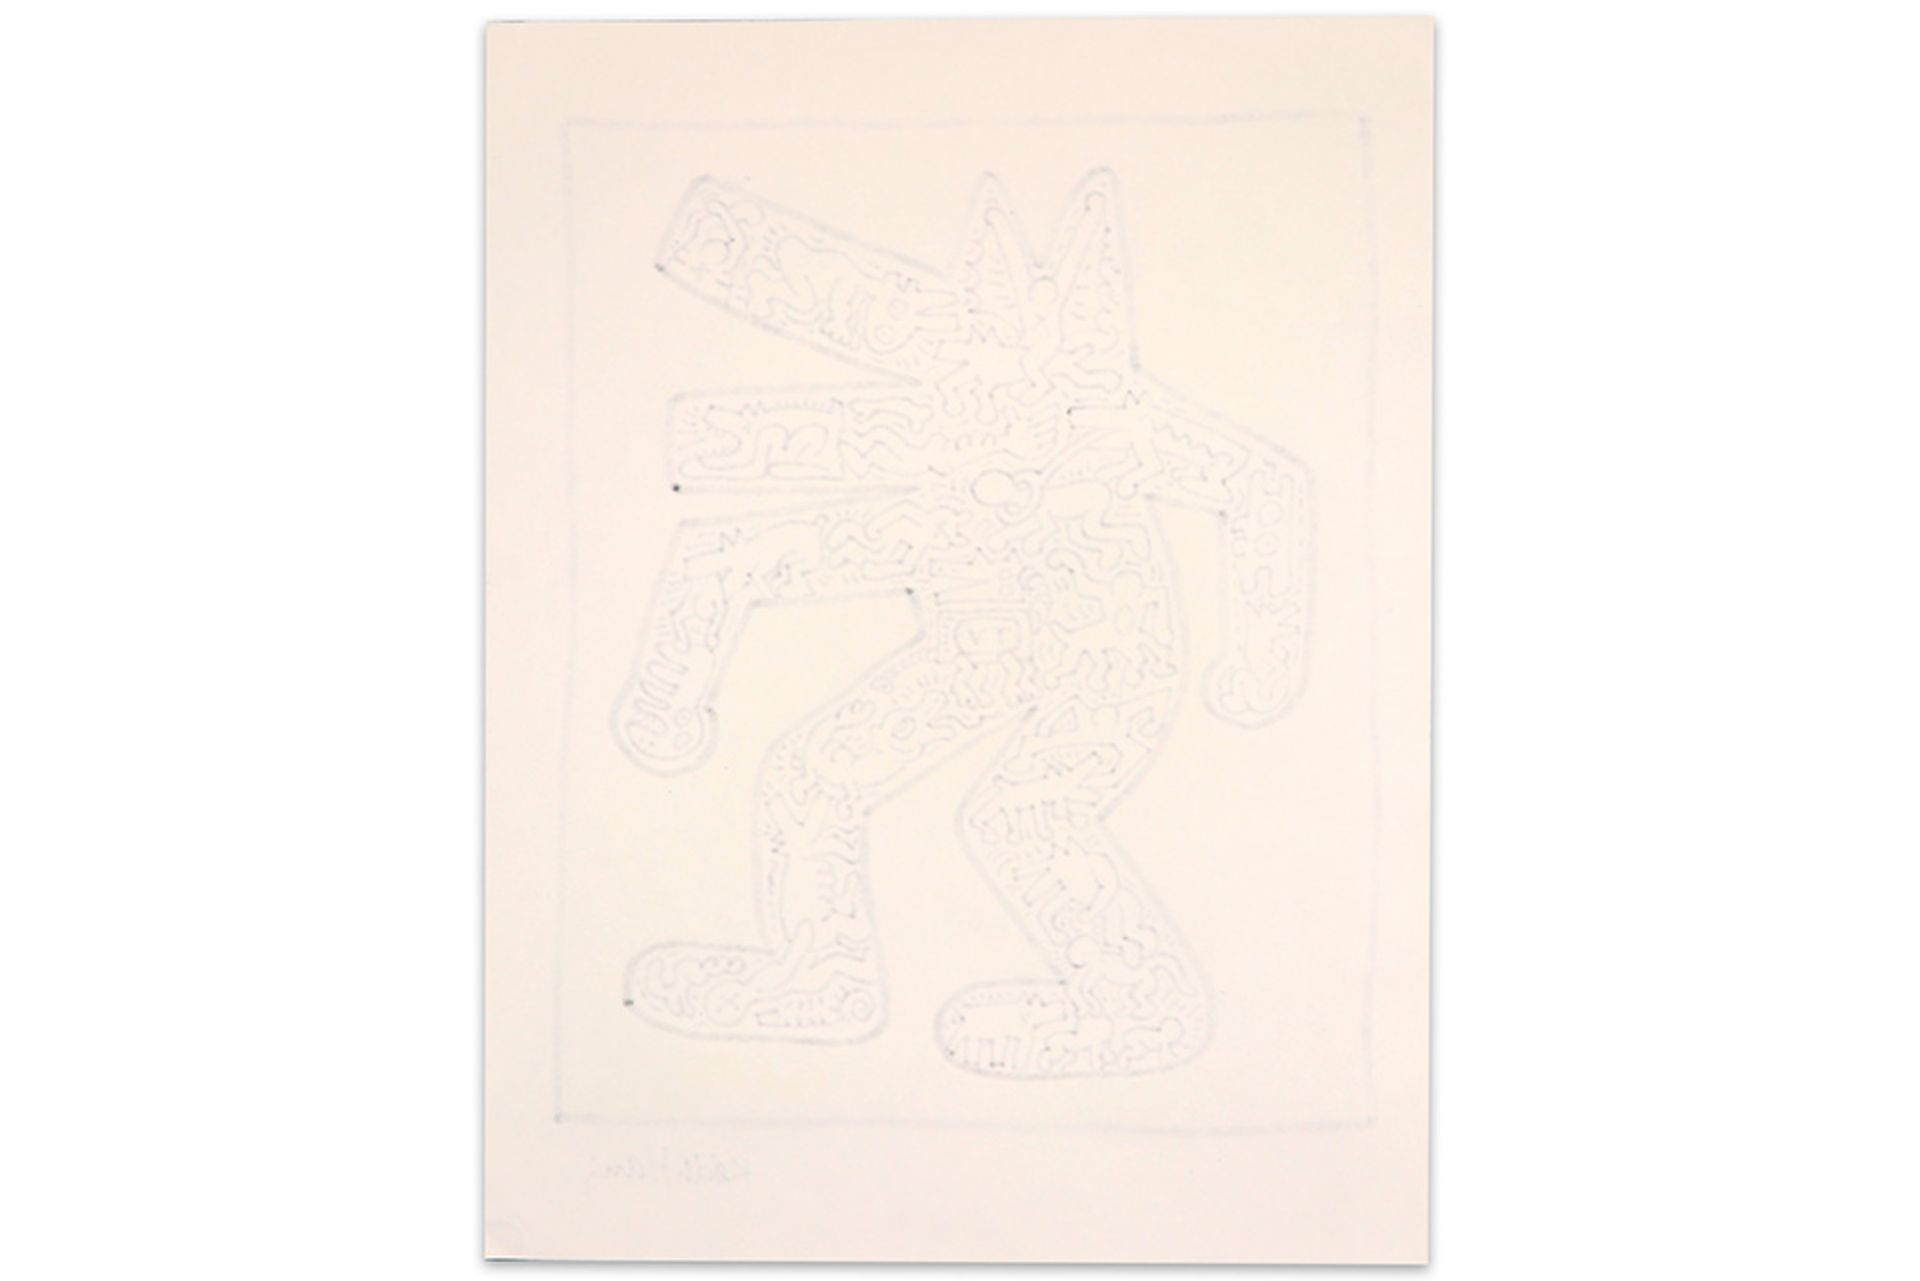 Keith Haring black felt tip pen drawing with typical figuration in a walking dog - signed || - Image 3 of 4